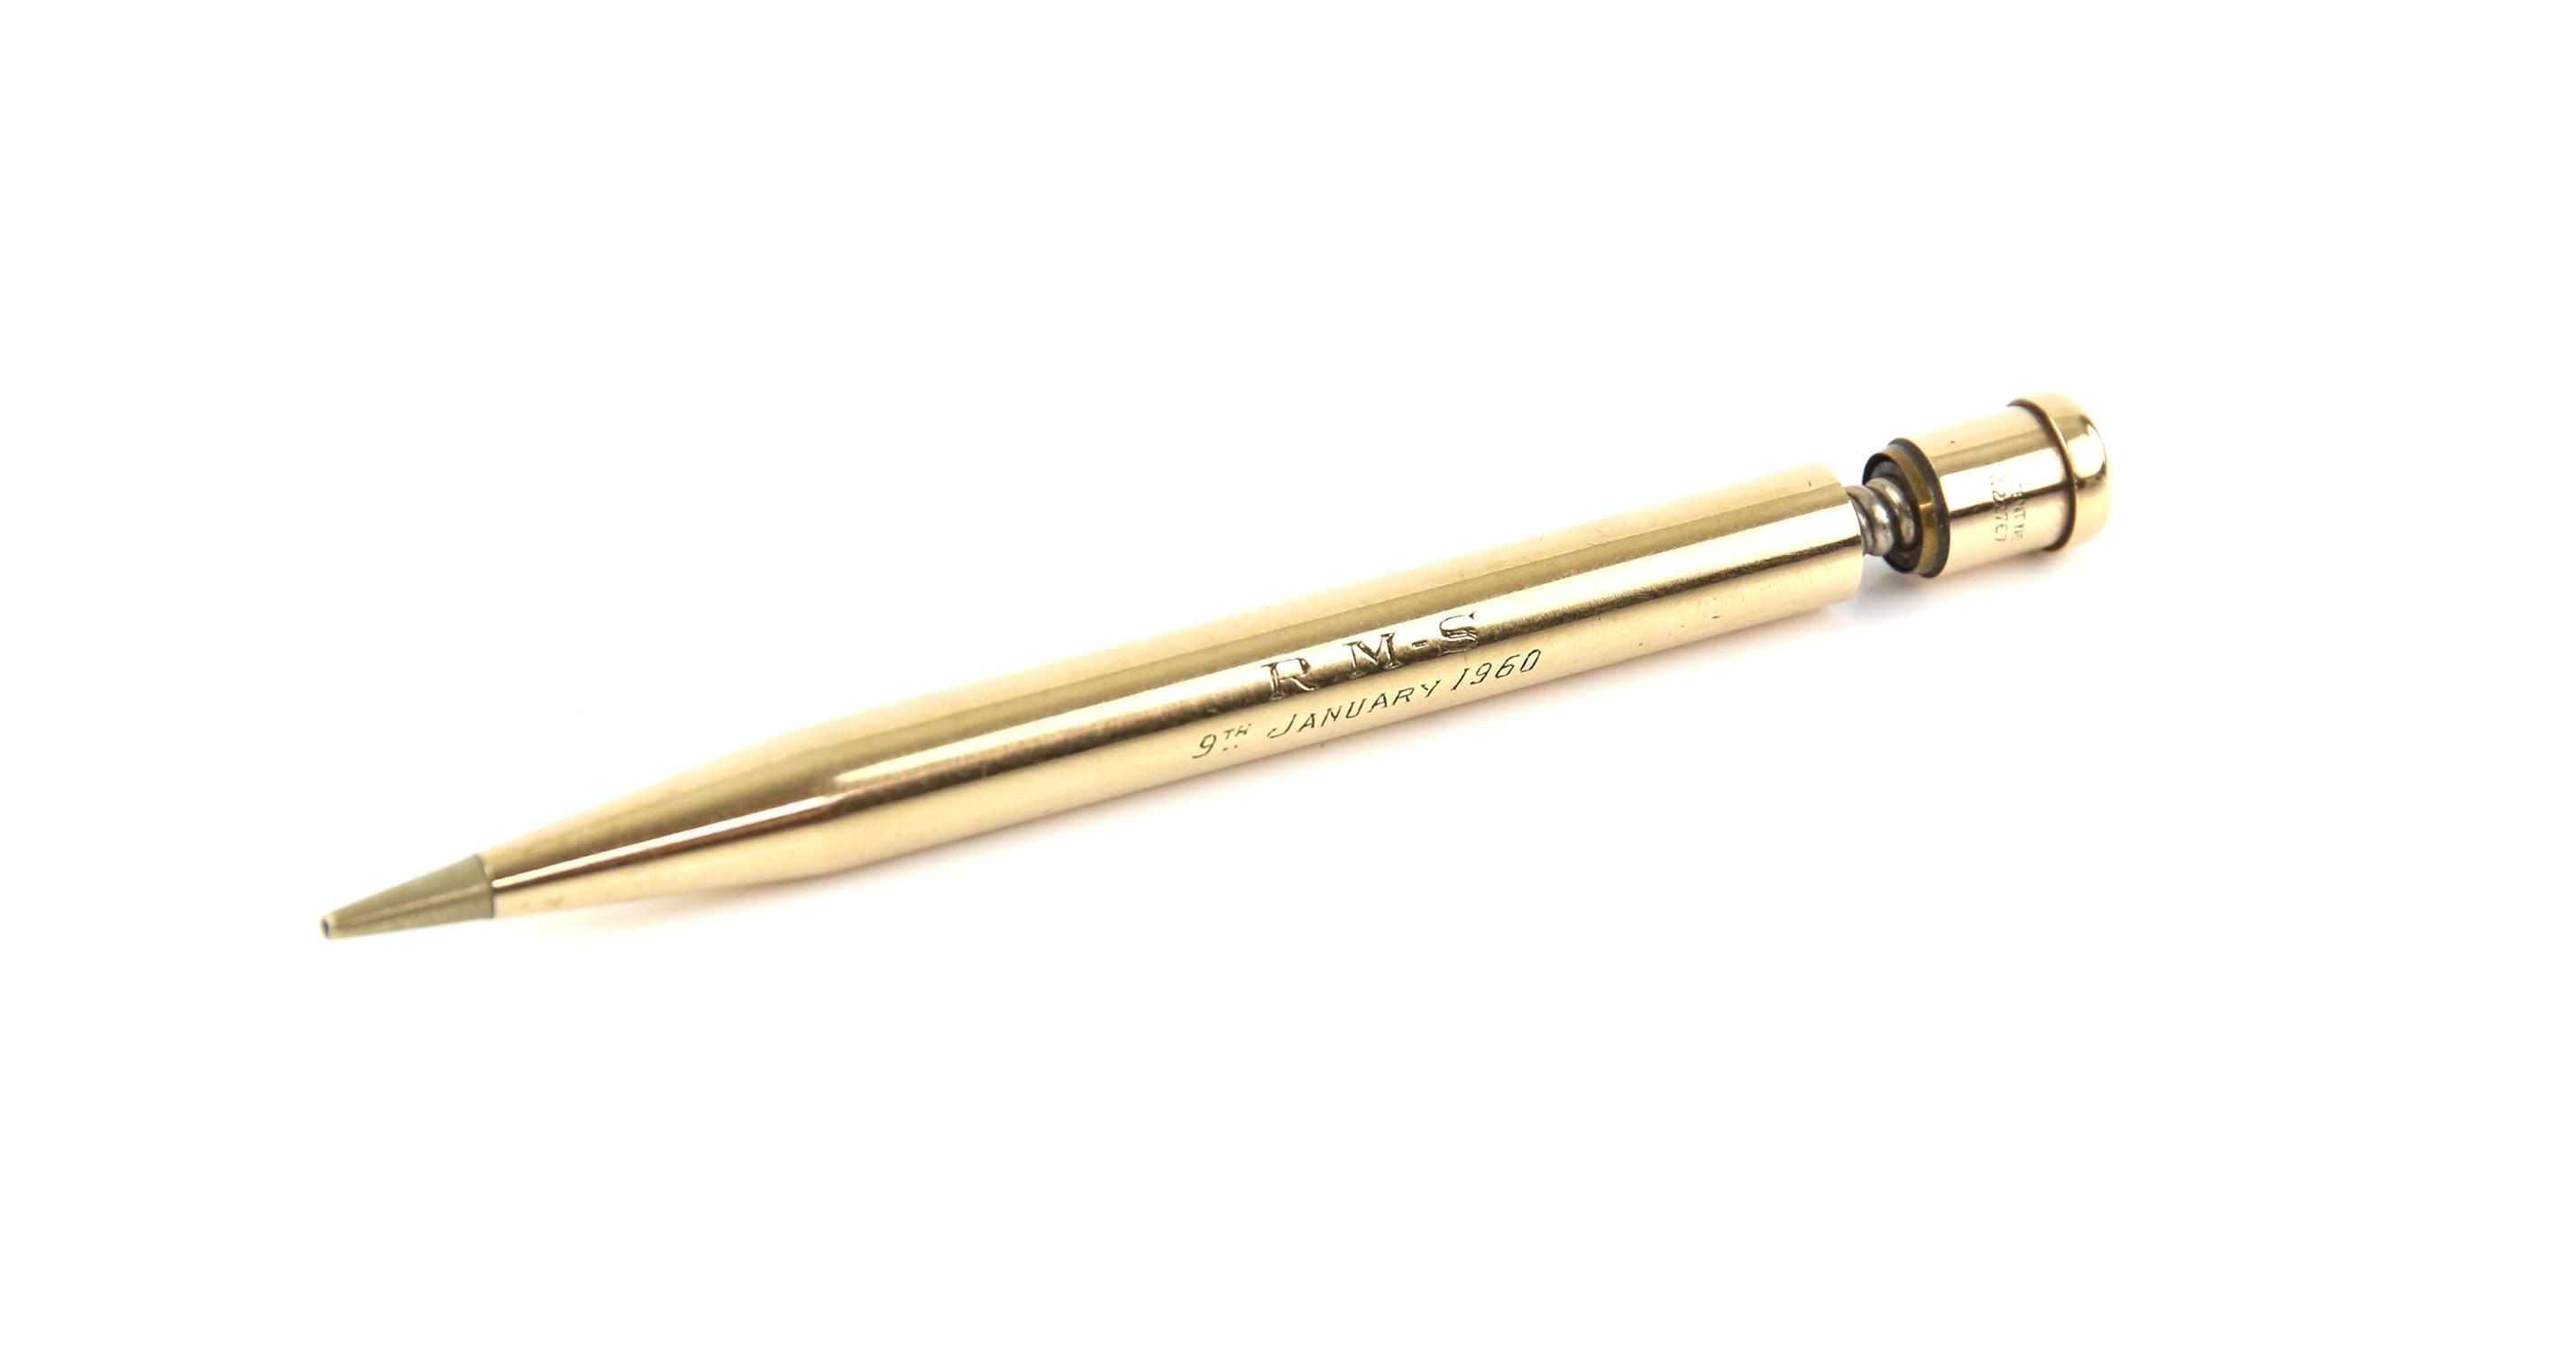 Yard-o-Lette gold propelling pencil, side engraved 'R.M-S 9th January 1960', cap marked Made in